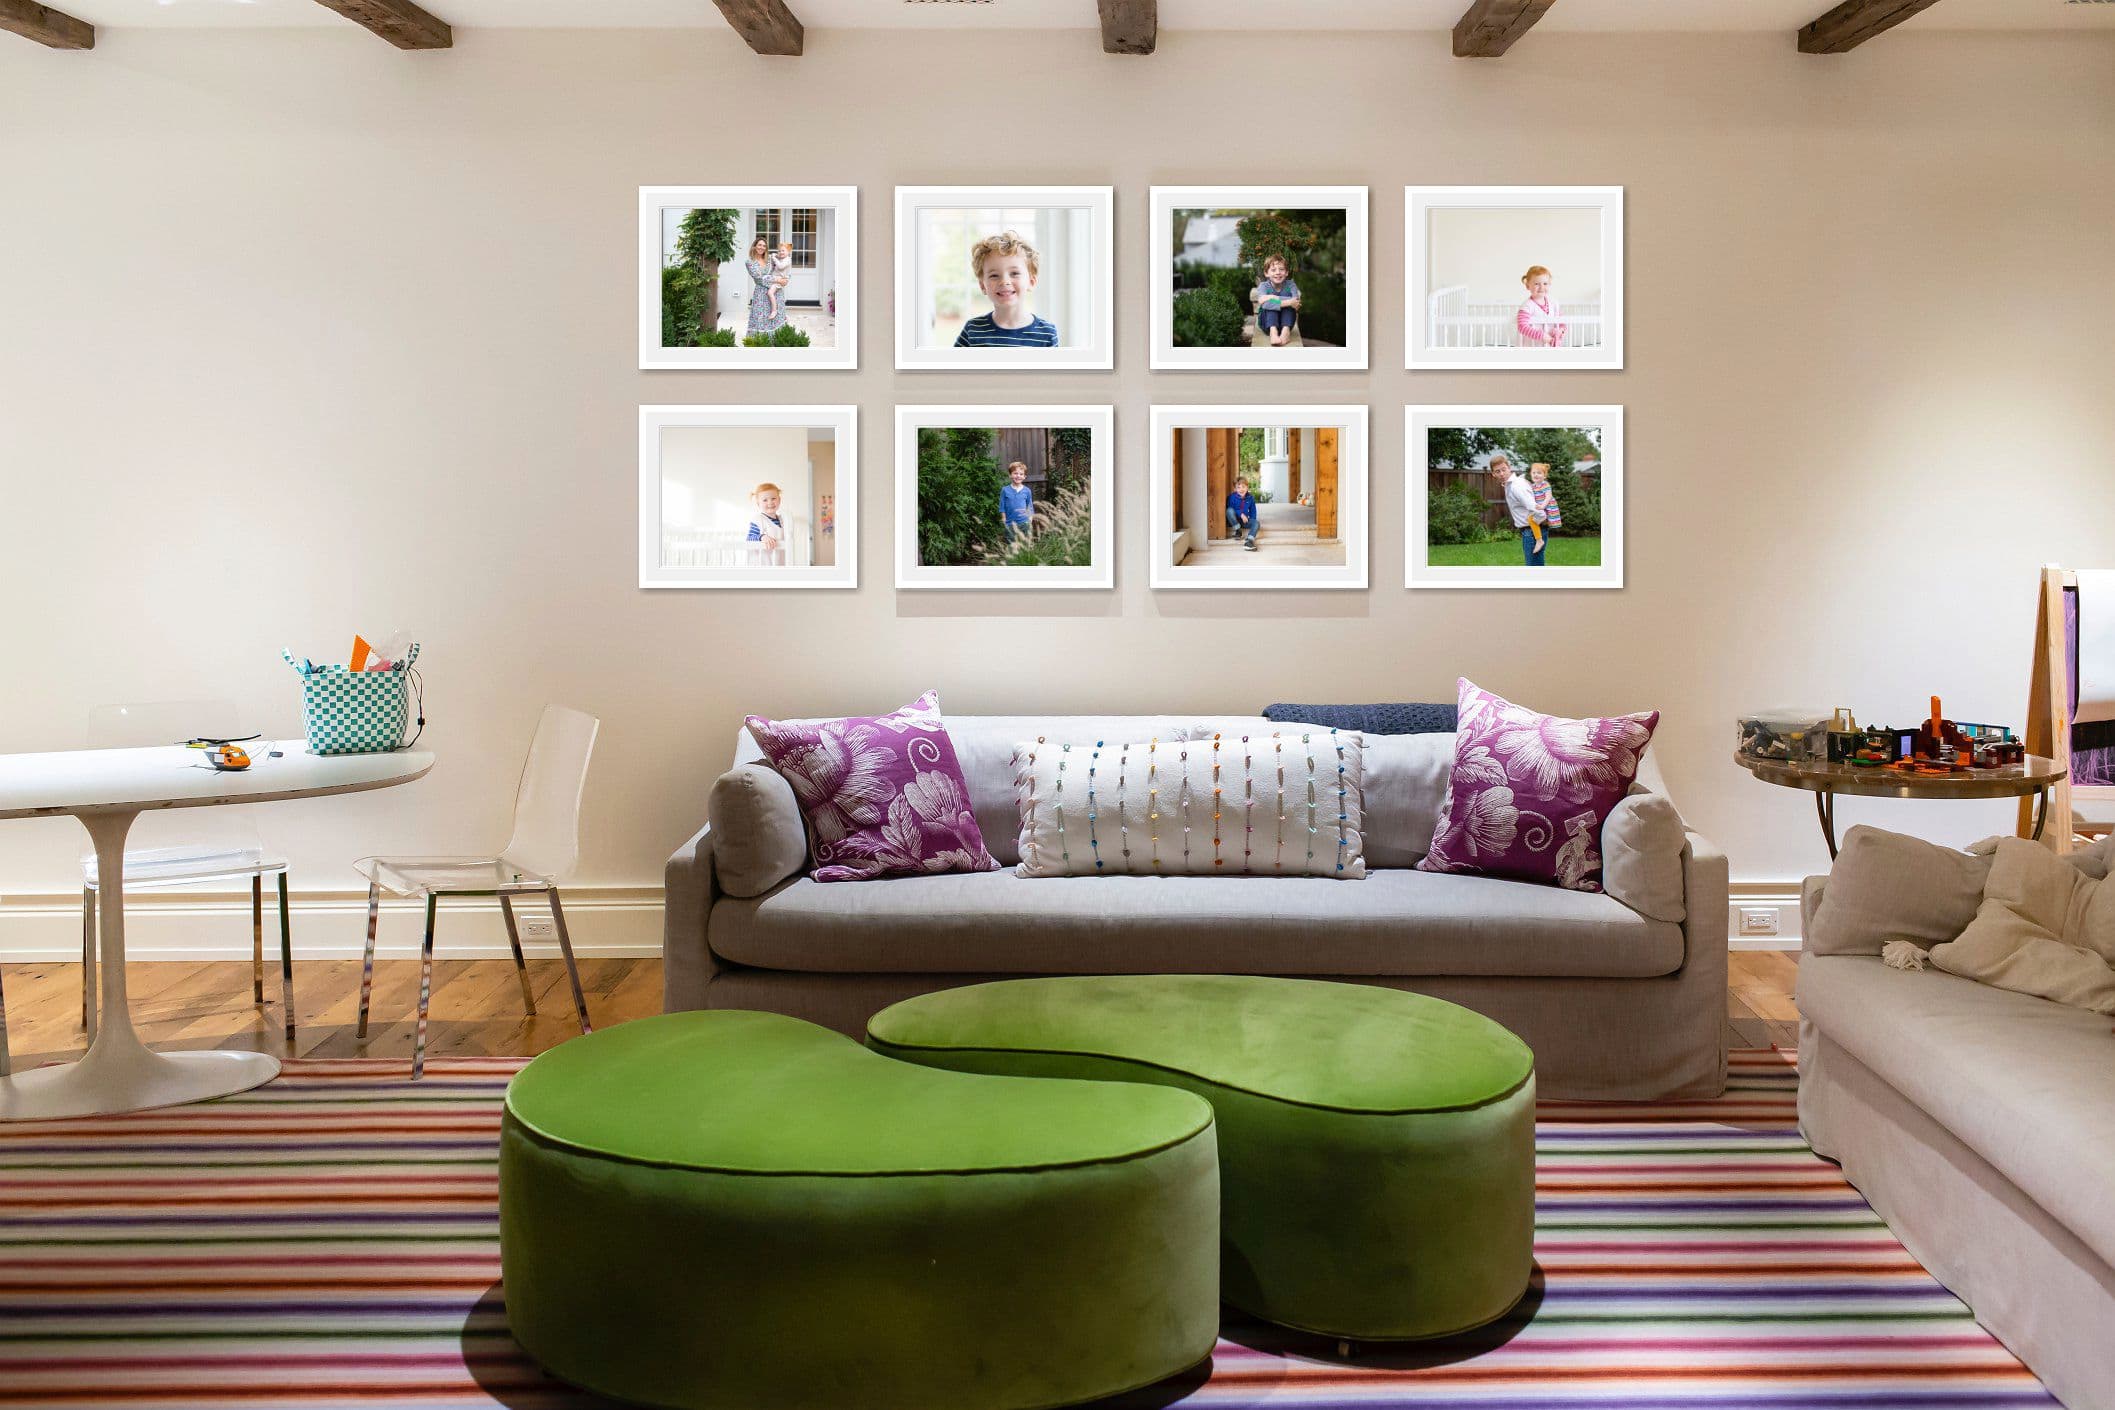 a grid of matching frames is a creative way to display family photos, as shown in this home, designed for clients in Chevy Chase by Julie Kubal.